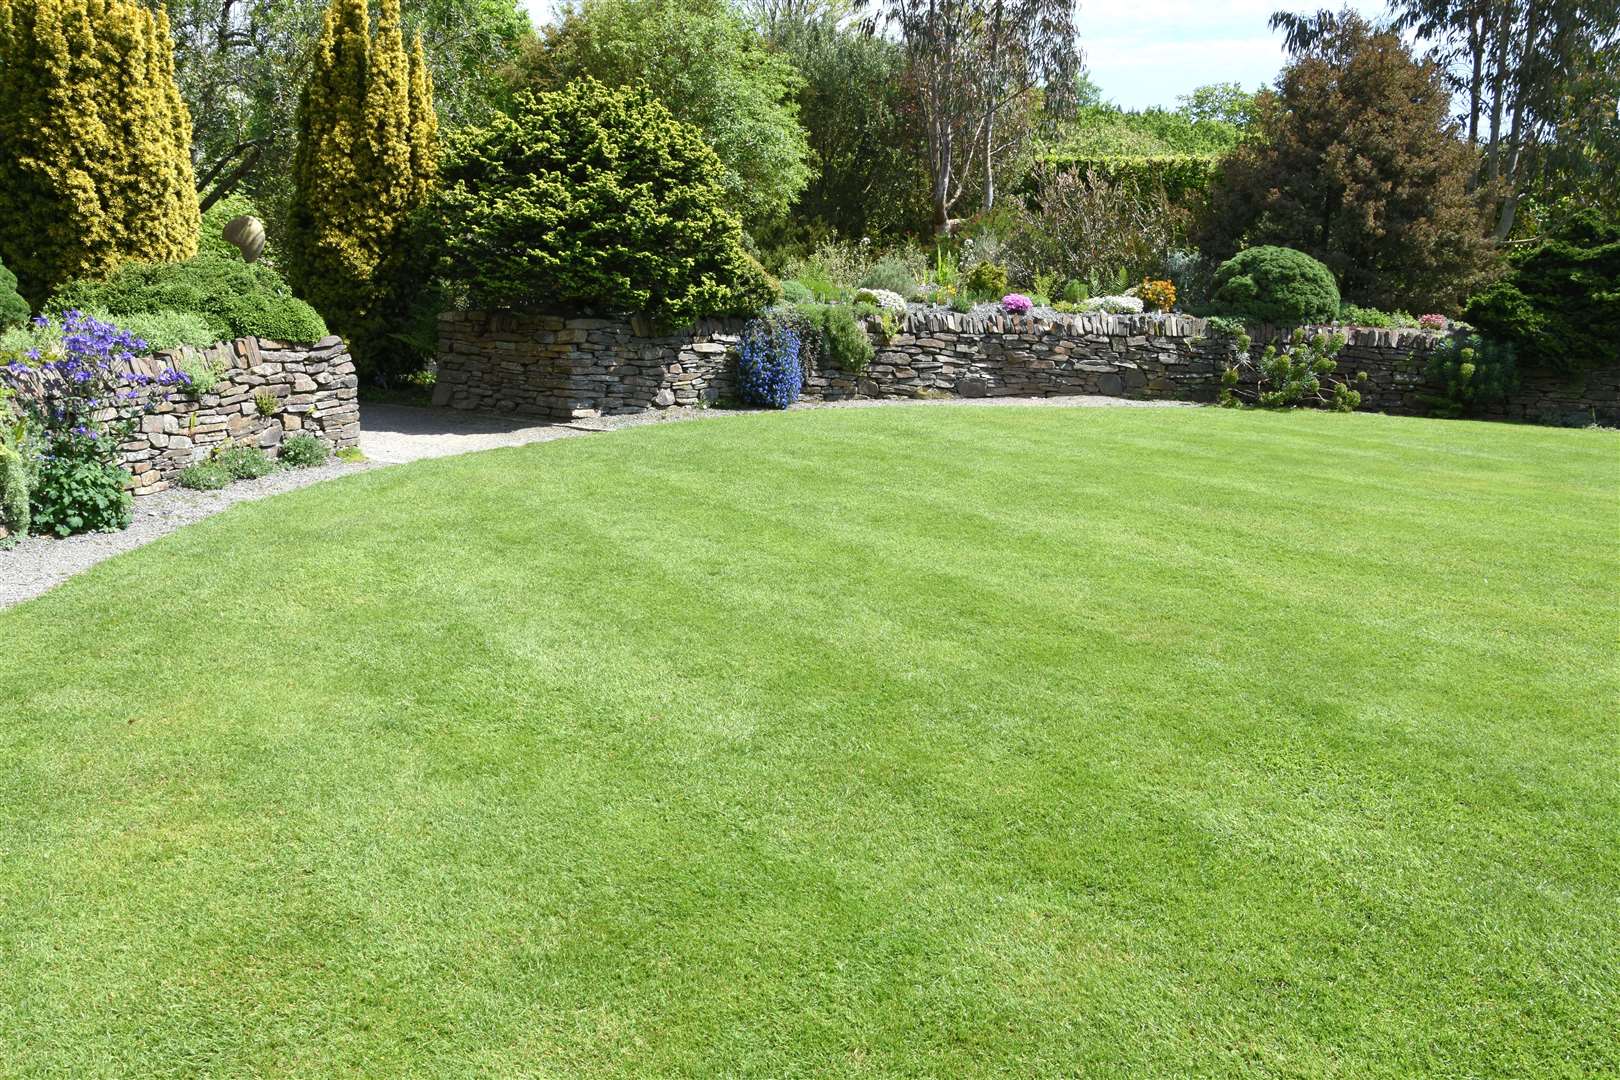 Simpsons recommends four simple steps to make your lawn look lush, green and healthy.